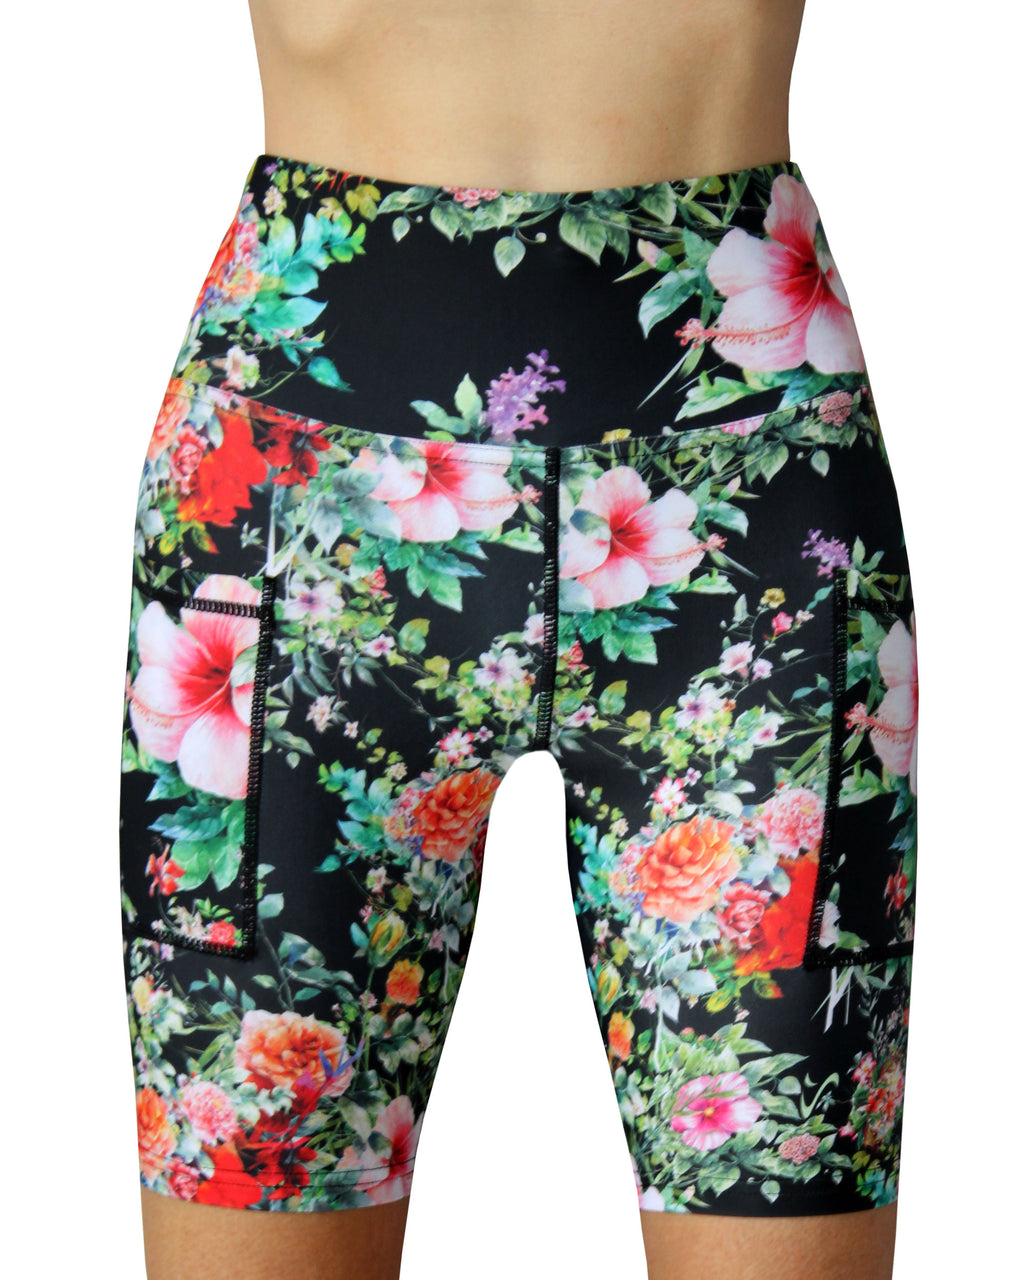 Hibuscus flower funky shorts for running and working out at the gym. Made By Vivolicious in Cape Town, South Africa. It features two cellphone pockets, and a high waistband.